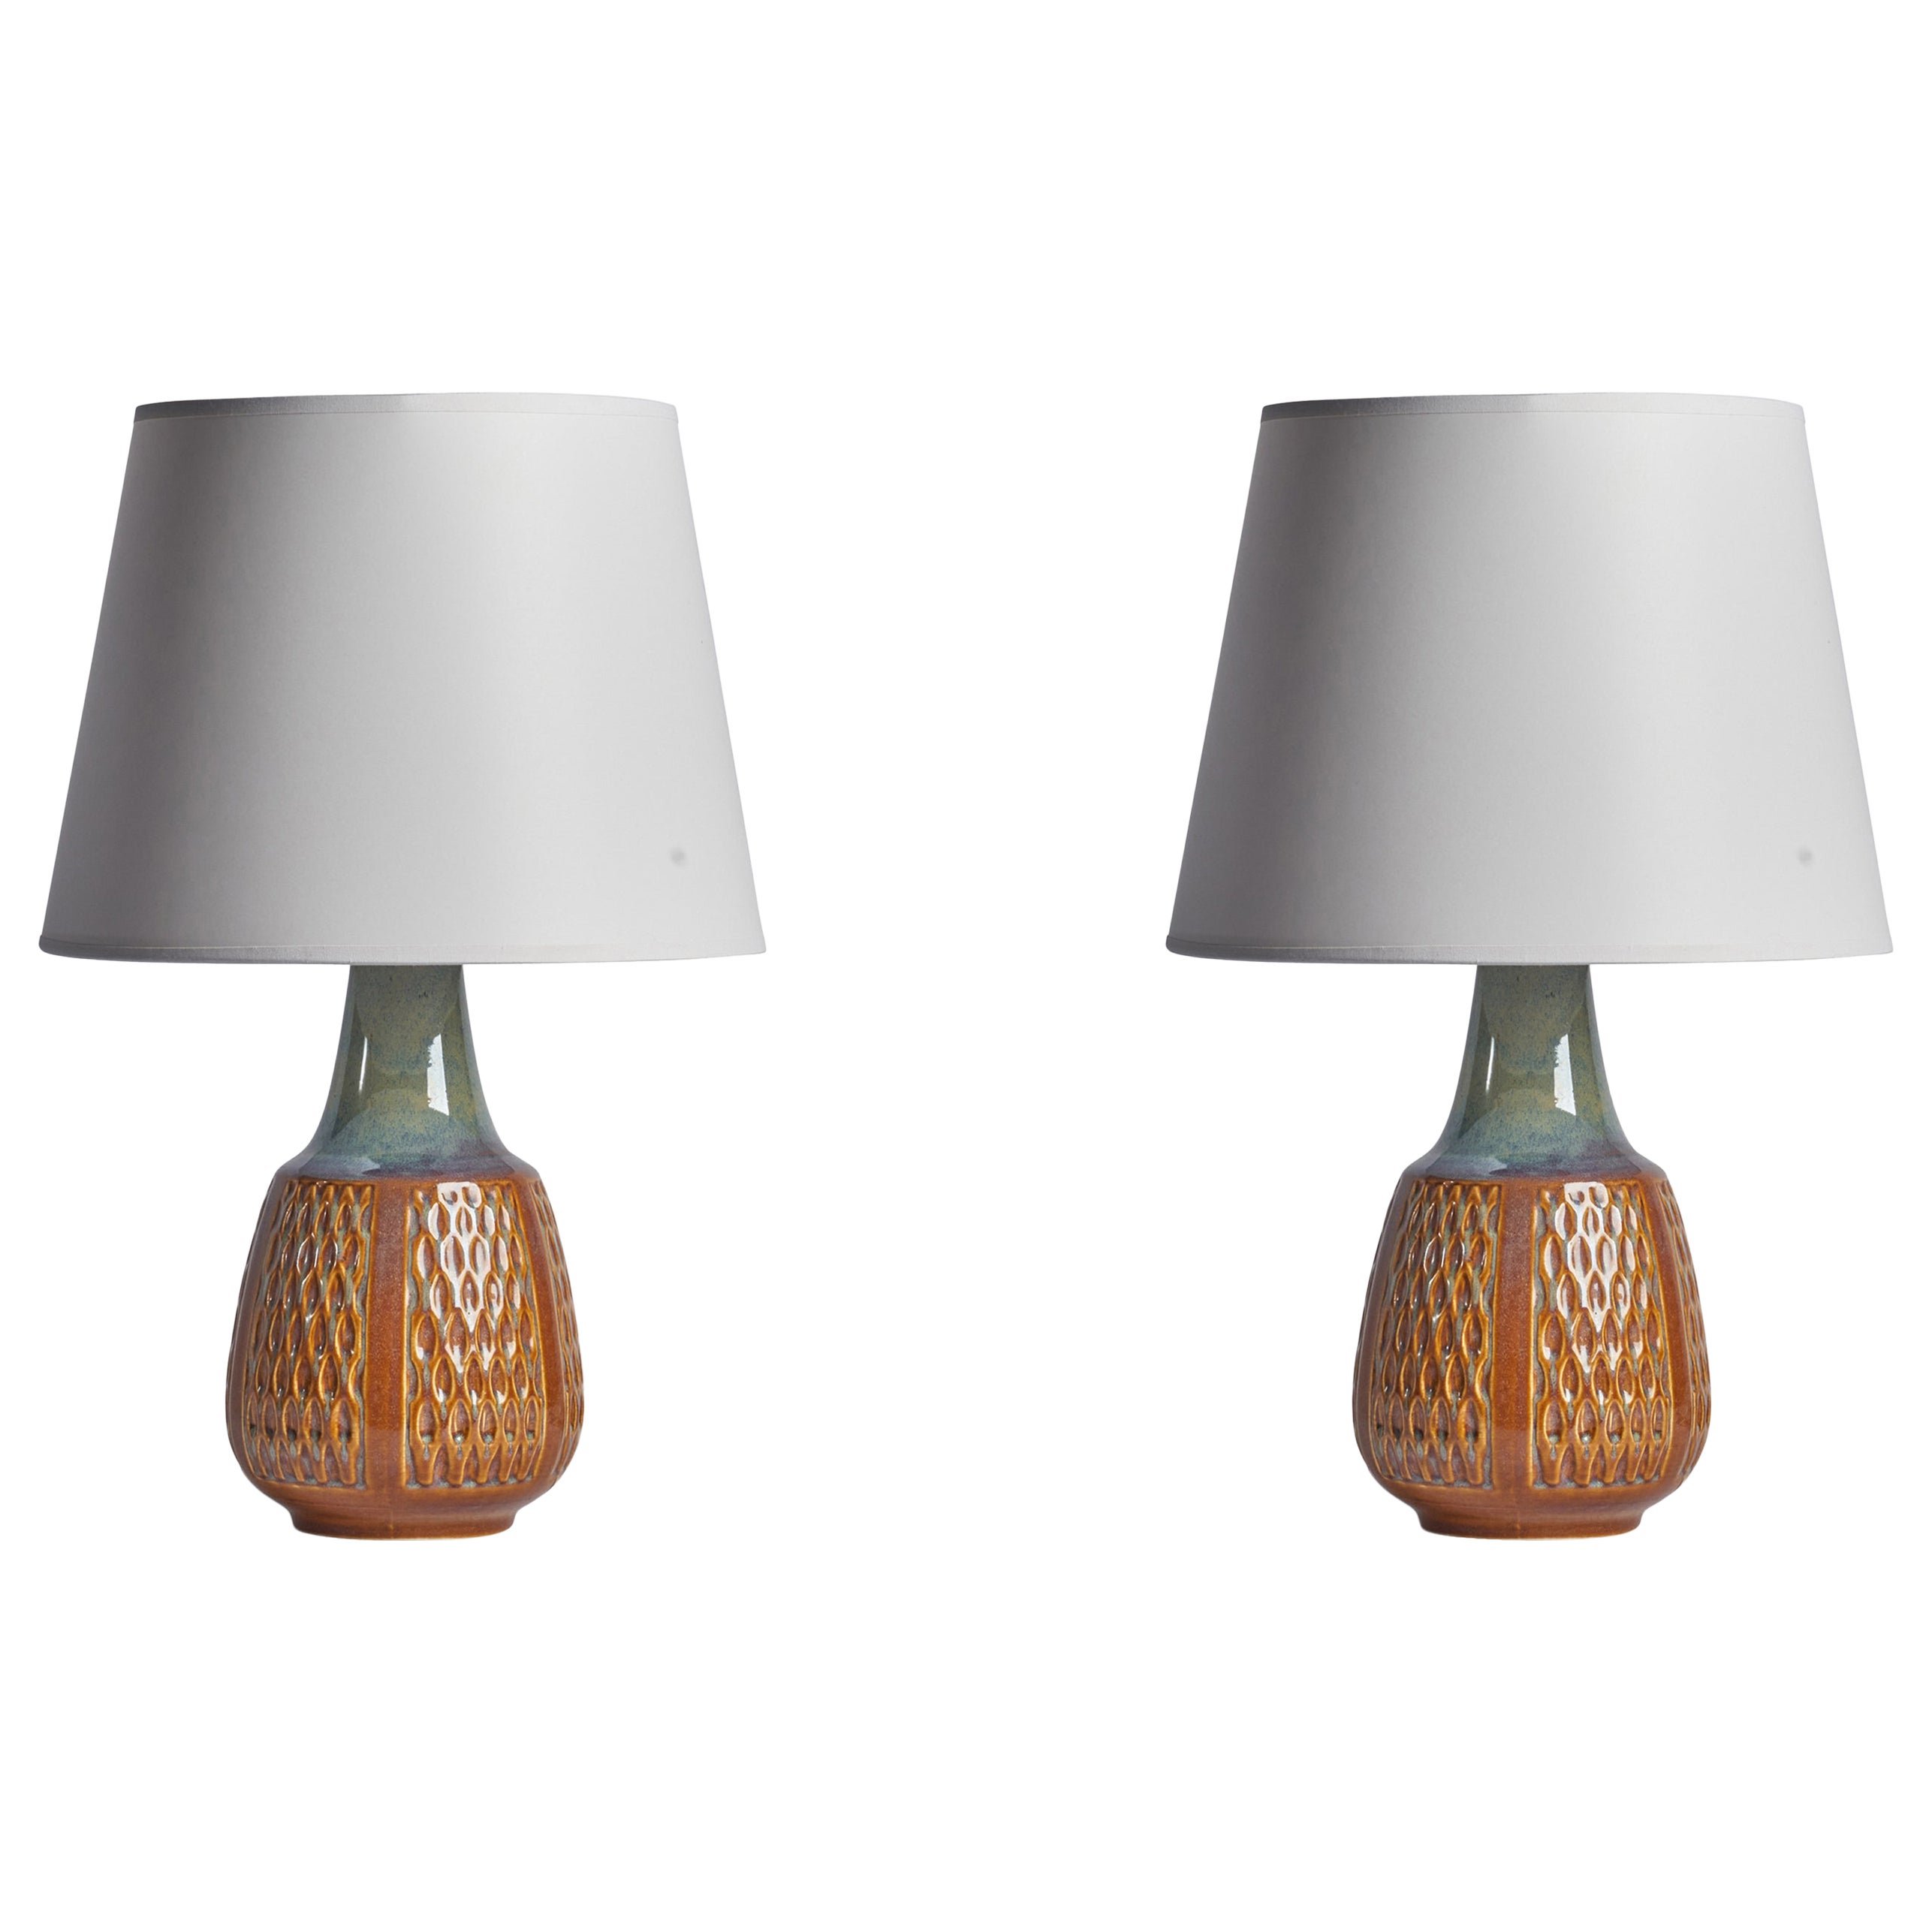 Søholm, Table Lamps, Stoneware, Denmark, 1960s For Sale